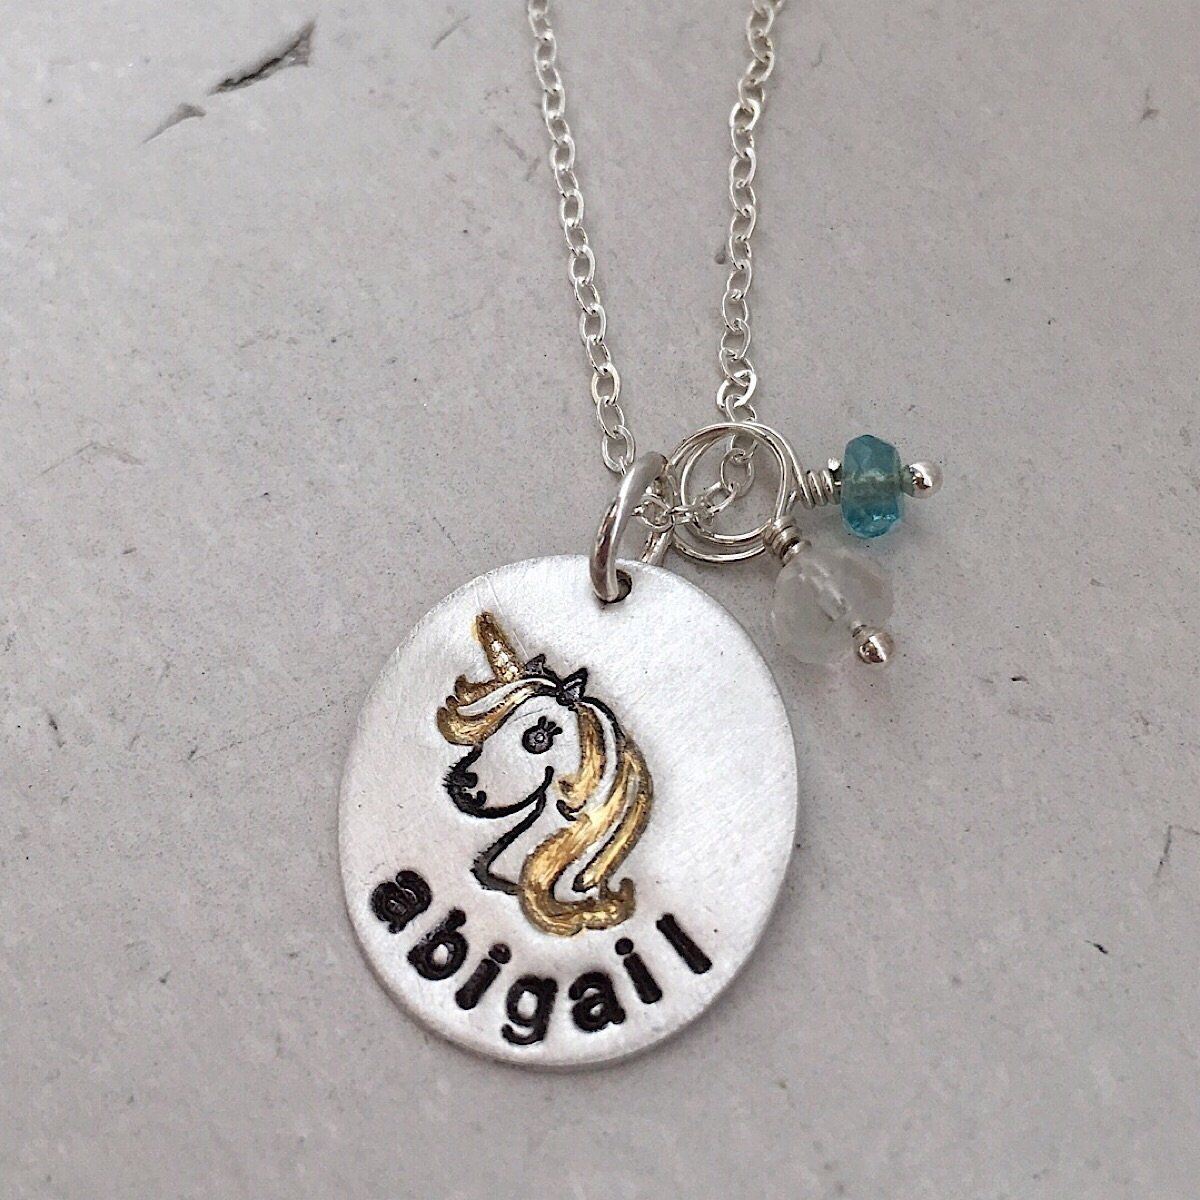 Unicorn Kisses Personalized Necklace  - IsabelleGraceJewelry